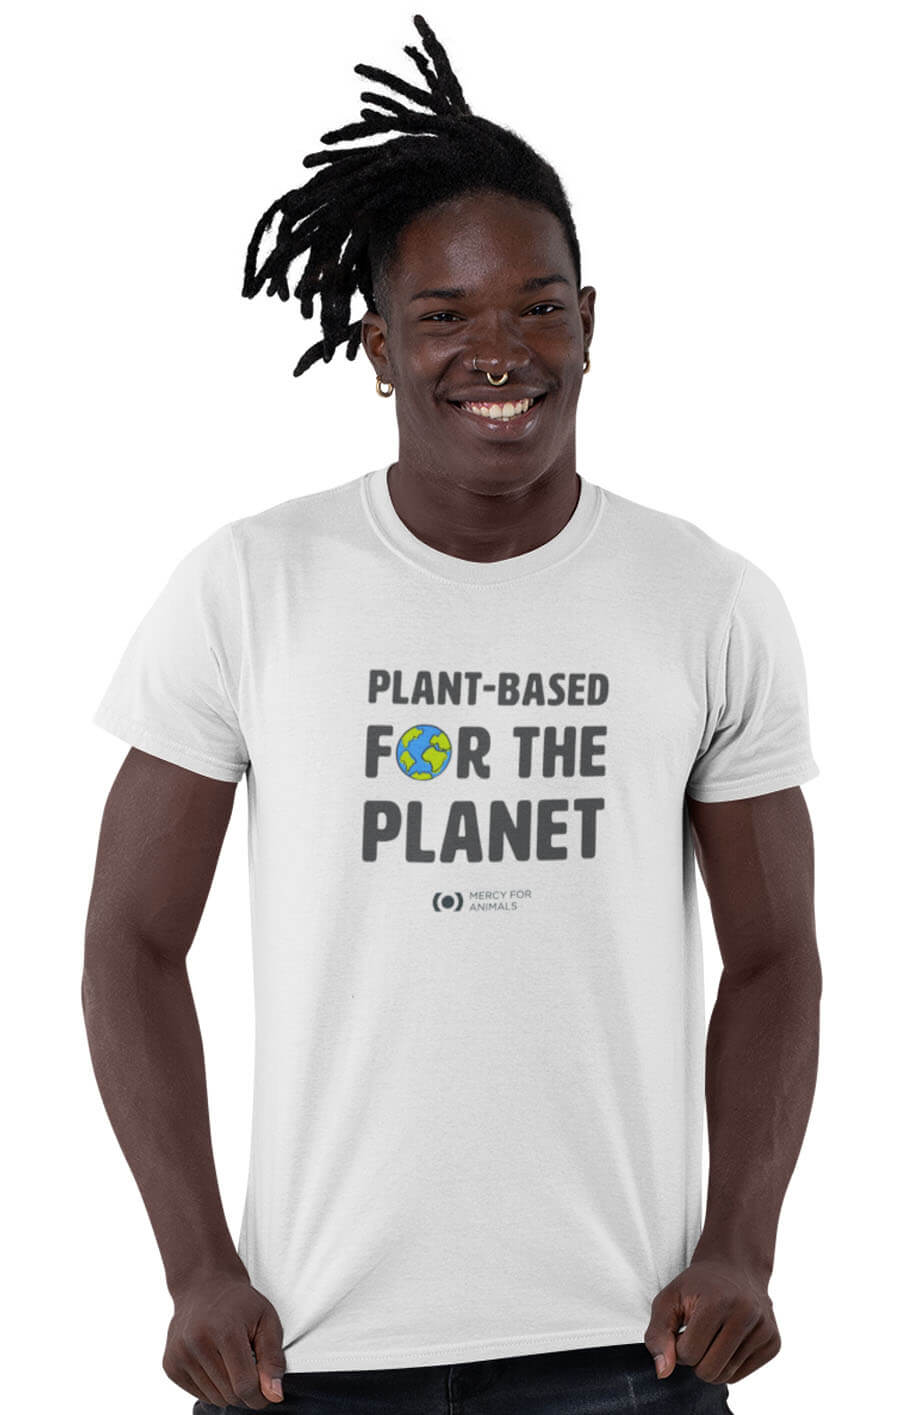 Plant based for the planet shirt